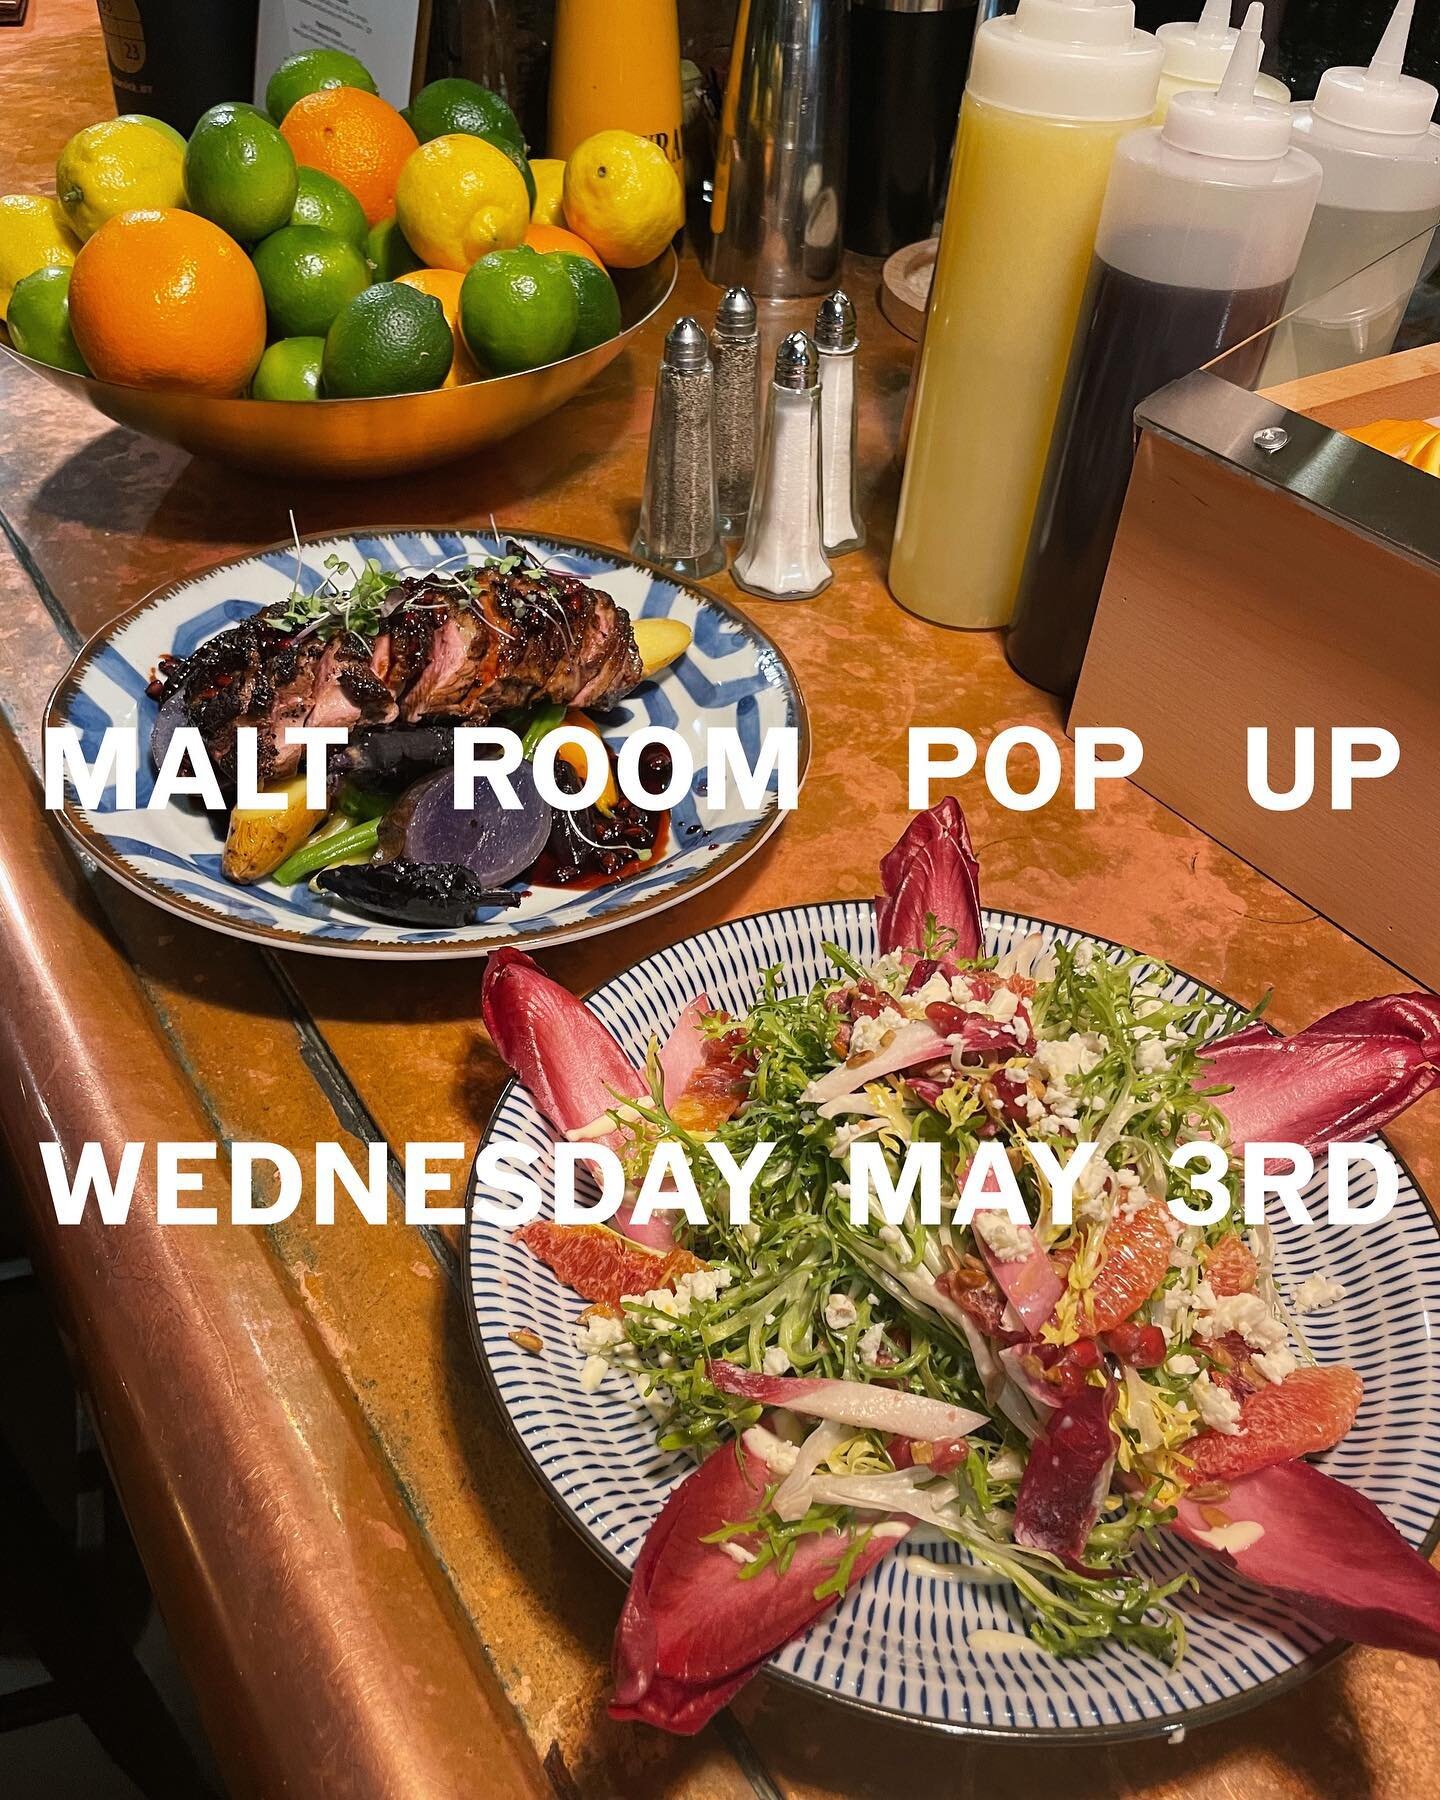 Happy May 1st! I hope everyone is ready for our second Malt Room Pop Up! Open to the public this Wednesday from 5-9pm!! We are gearing up for Cinco de Mayo with a full themed menu curated by Chef Nigel Peters. We will also have a specialty cocktail m